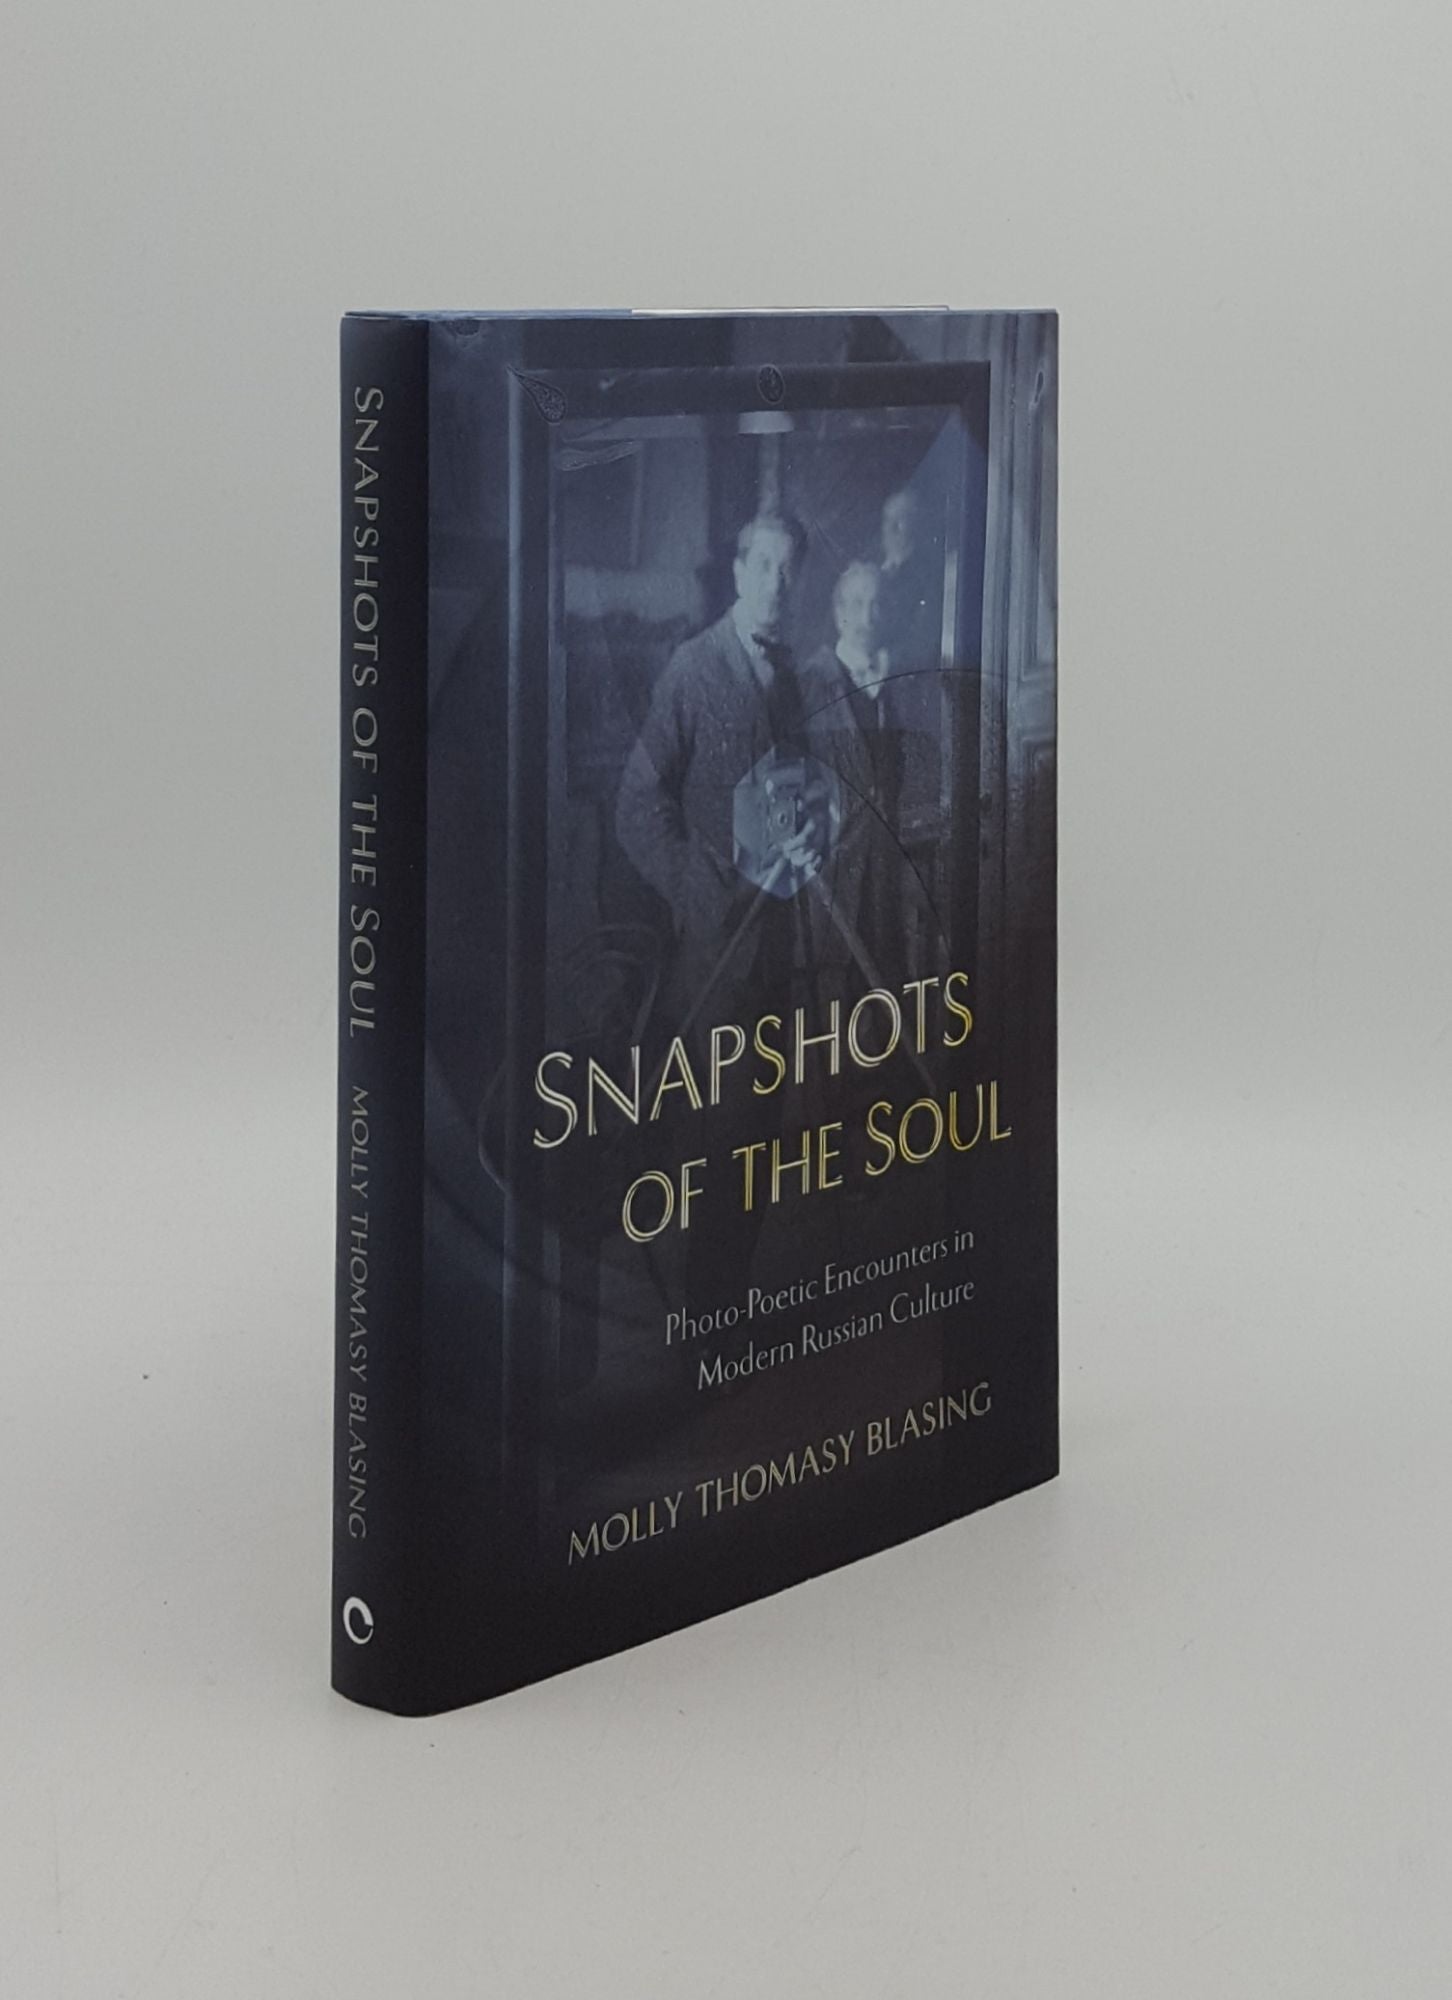 BLASING Molly Thomasy - Snapshots of the Soul Photo-Poetic Encounters in Modern Russian Culture